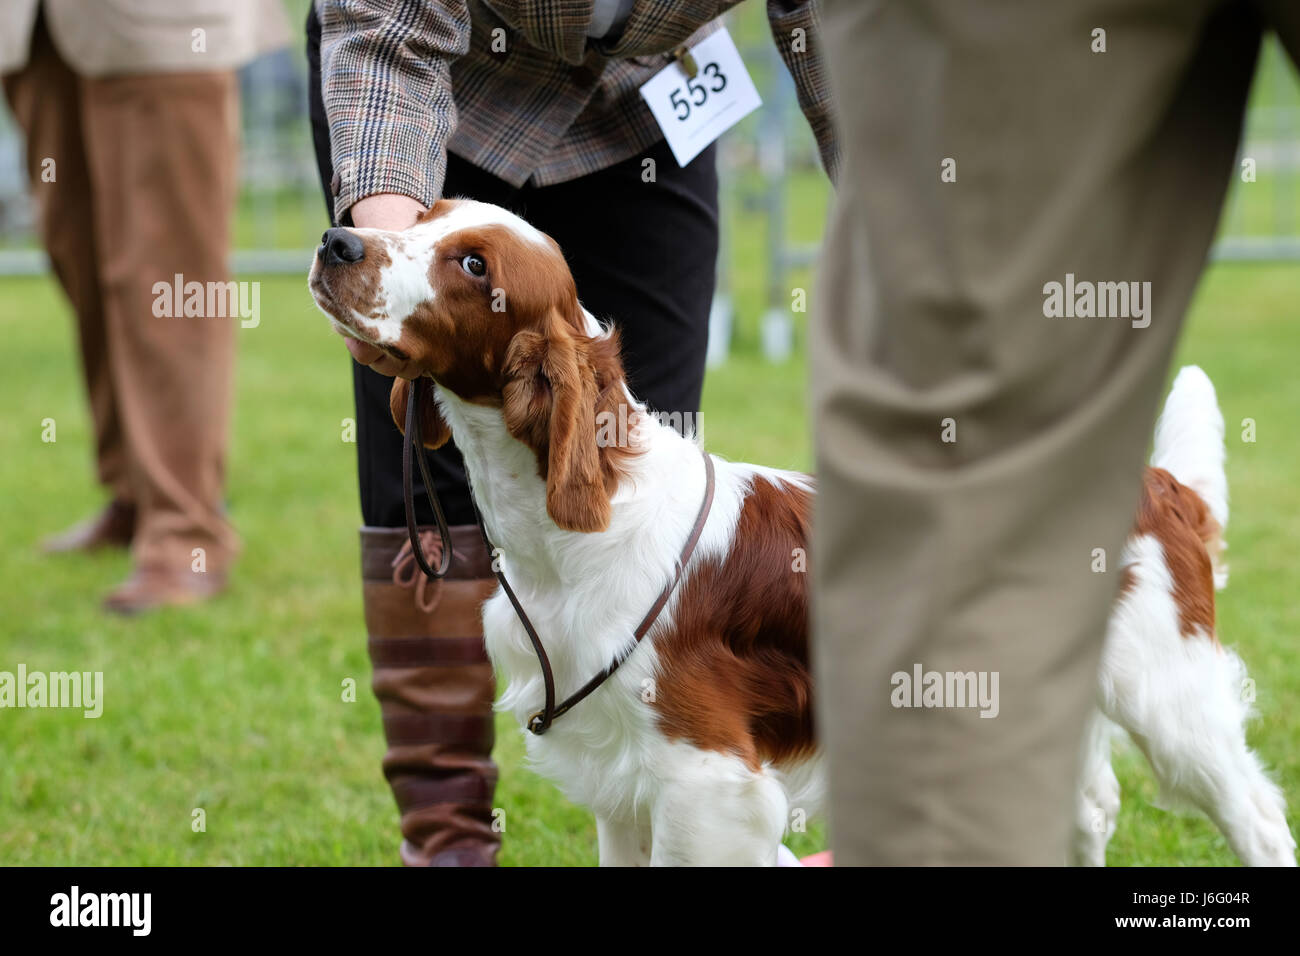 Royal Welsh Spring Festival, Builth Wells, Powys, Wales - May 2017 - A competitor in the dog show arena exhibits her Welsh Spring Spaniel dog in front of the judge at the Royal Welsh Spring Festival. This contest feeds through into Crufts. Photo Steven May / Alamy Live News Stock Photo